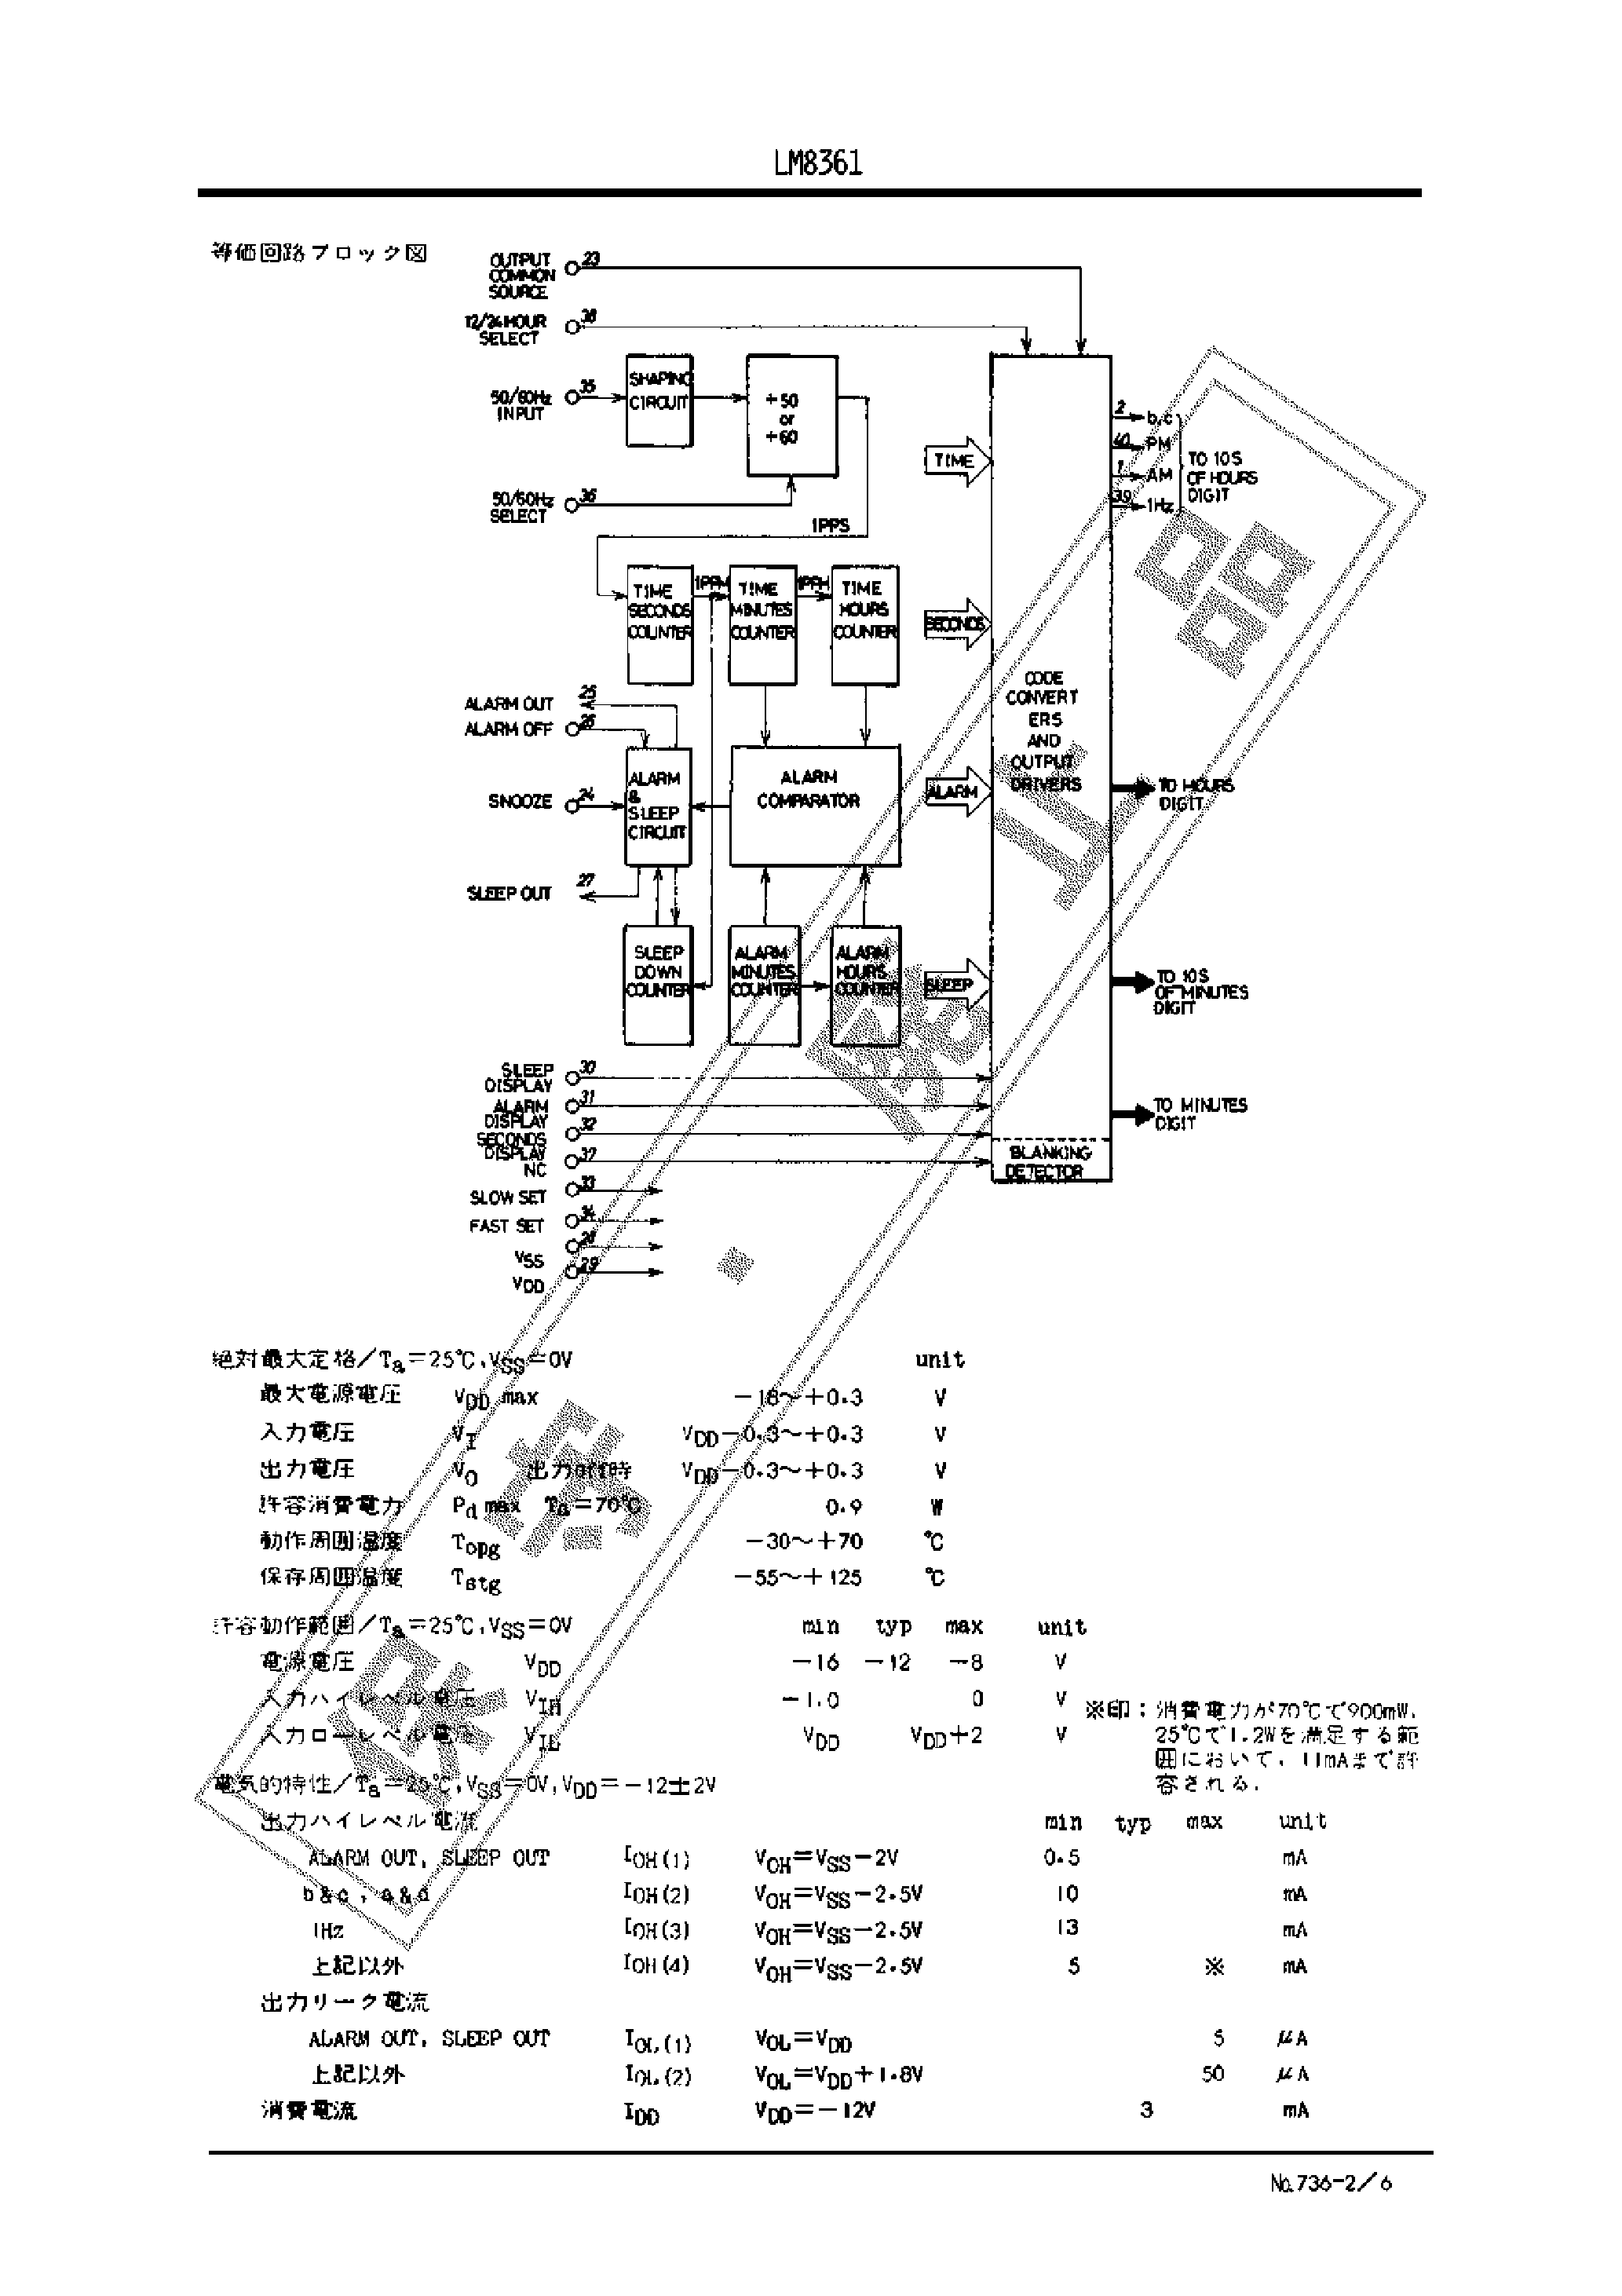 Datasheet LM8361 - P-MOS LSI page 2